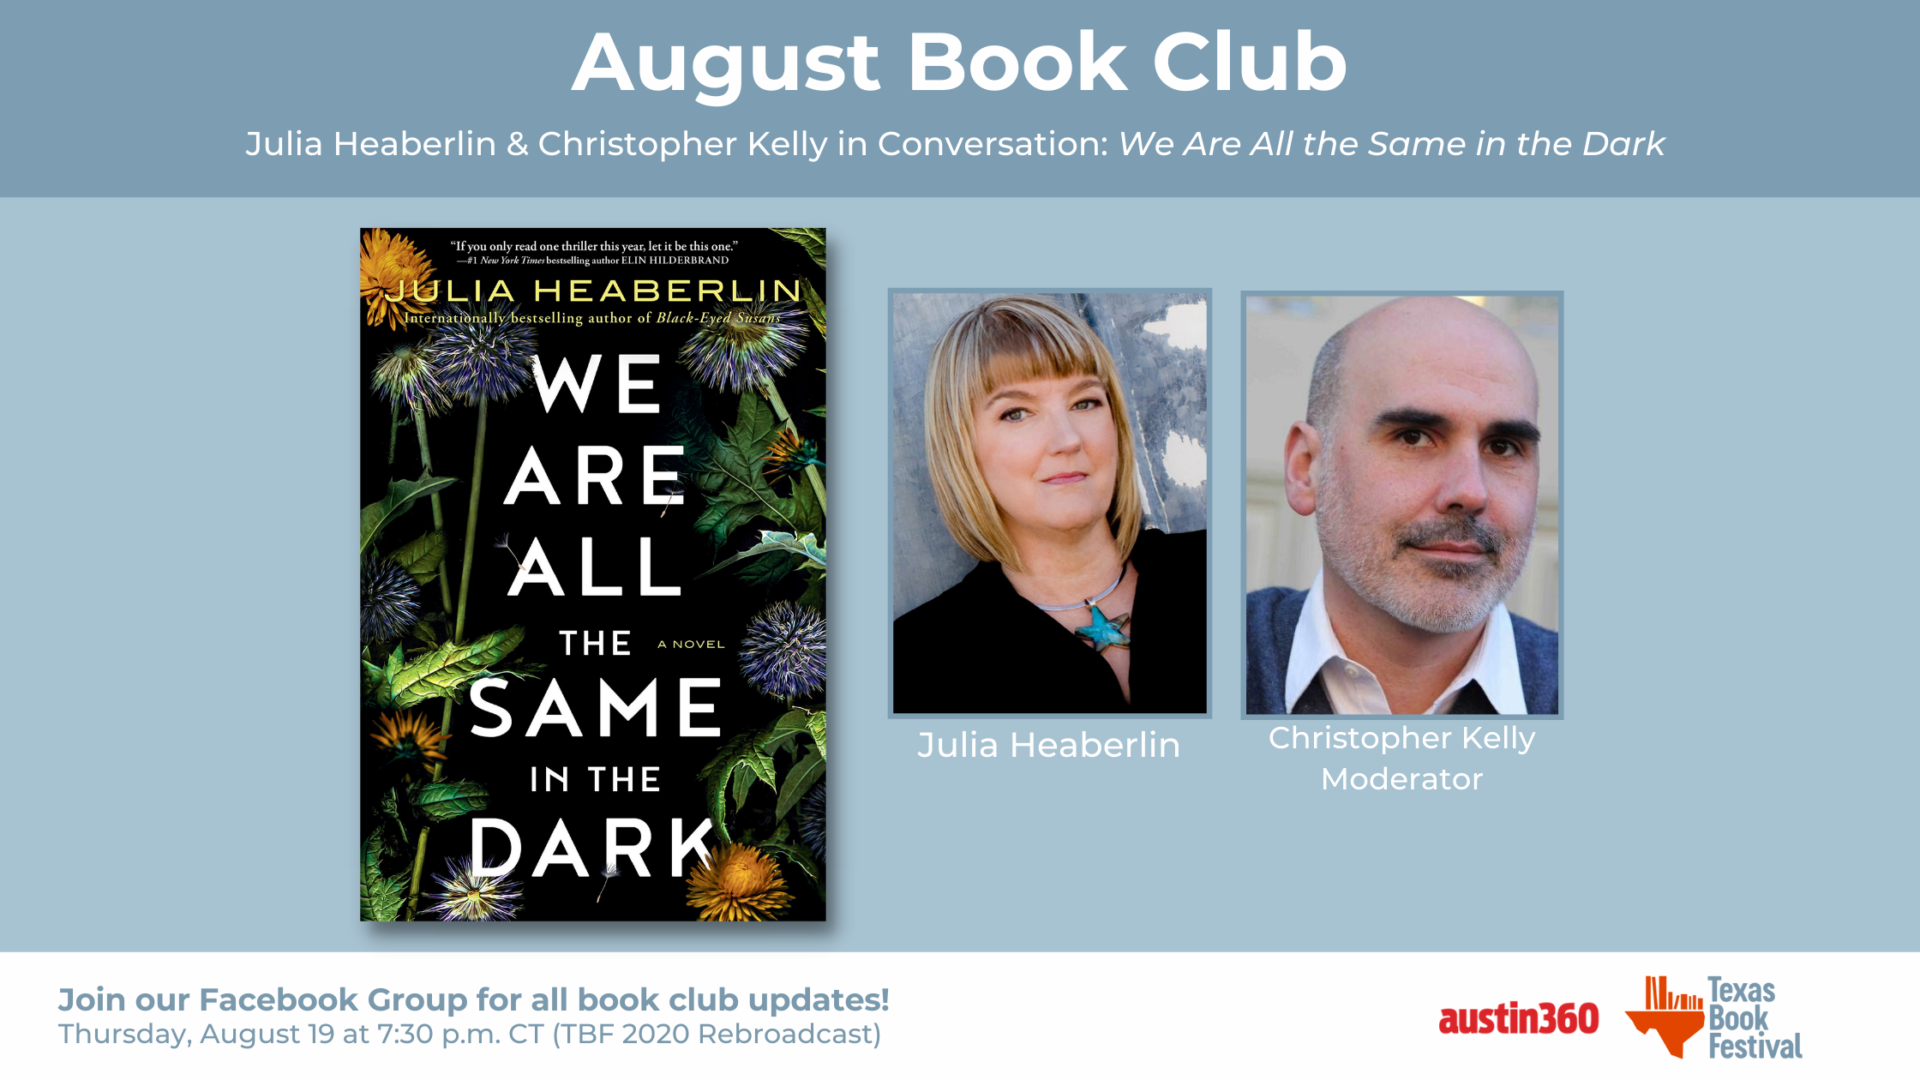 August Book Club: WE ARE ALL THE SAME IN THE DARK